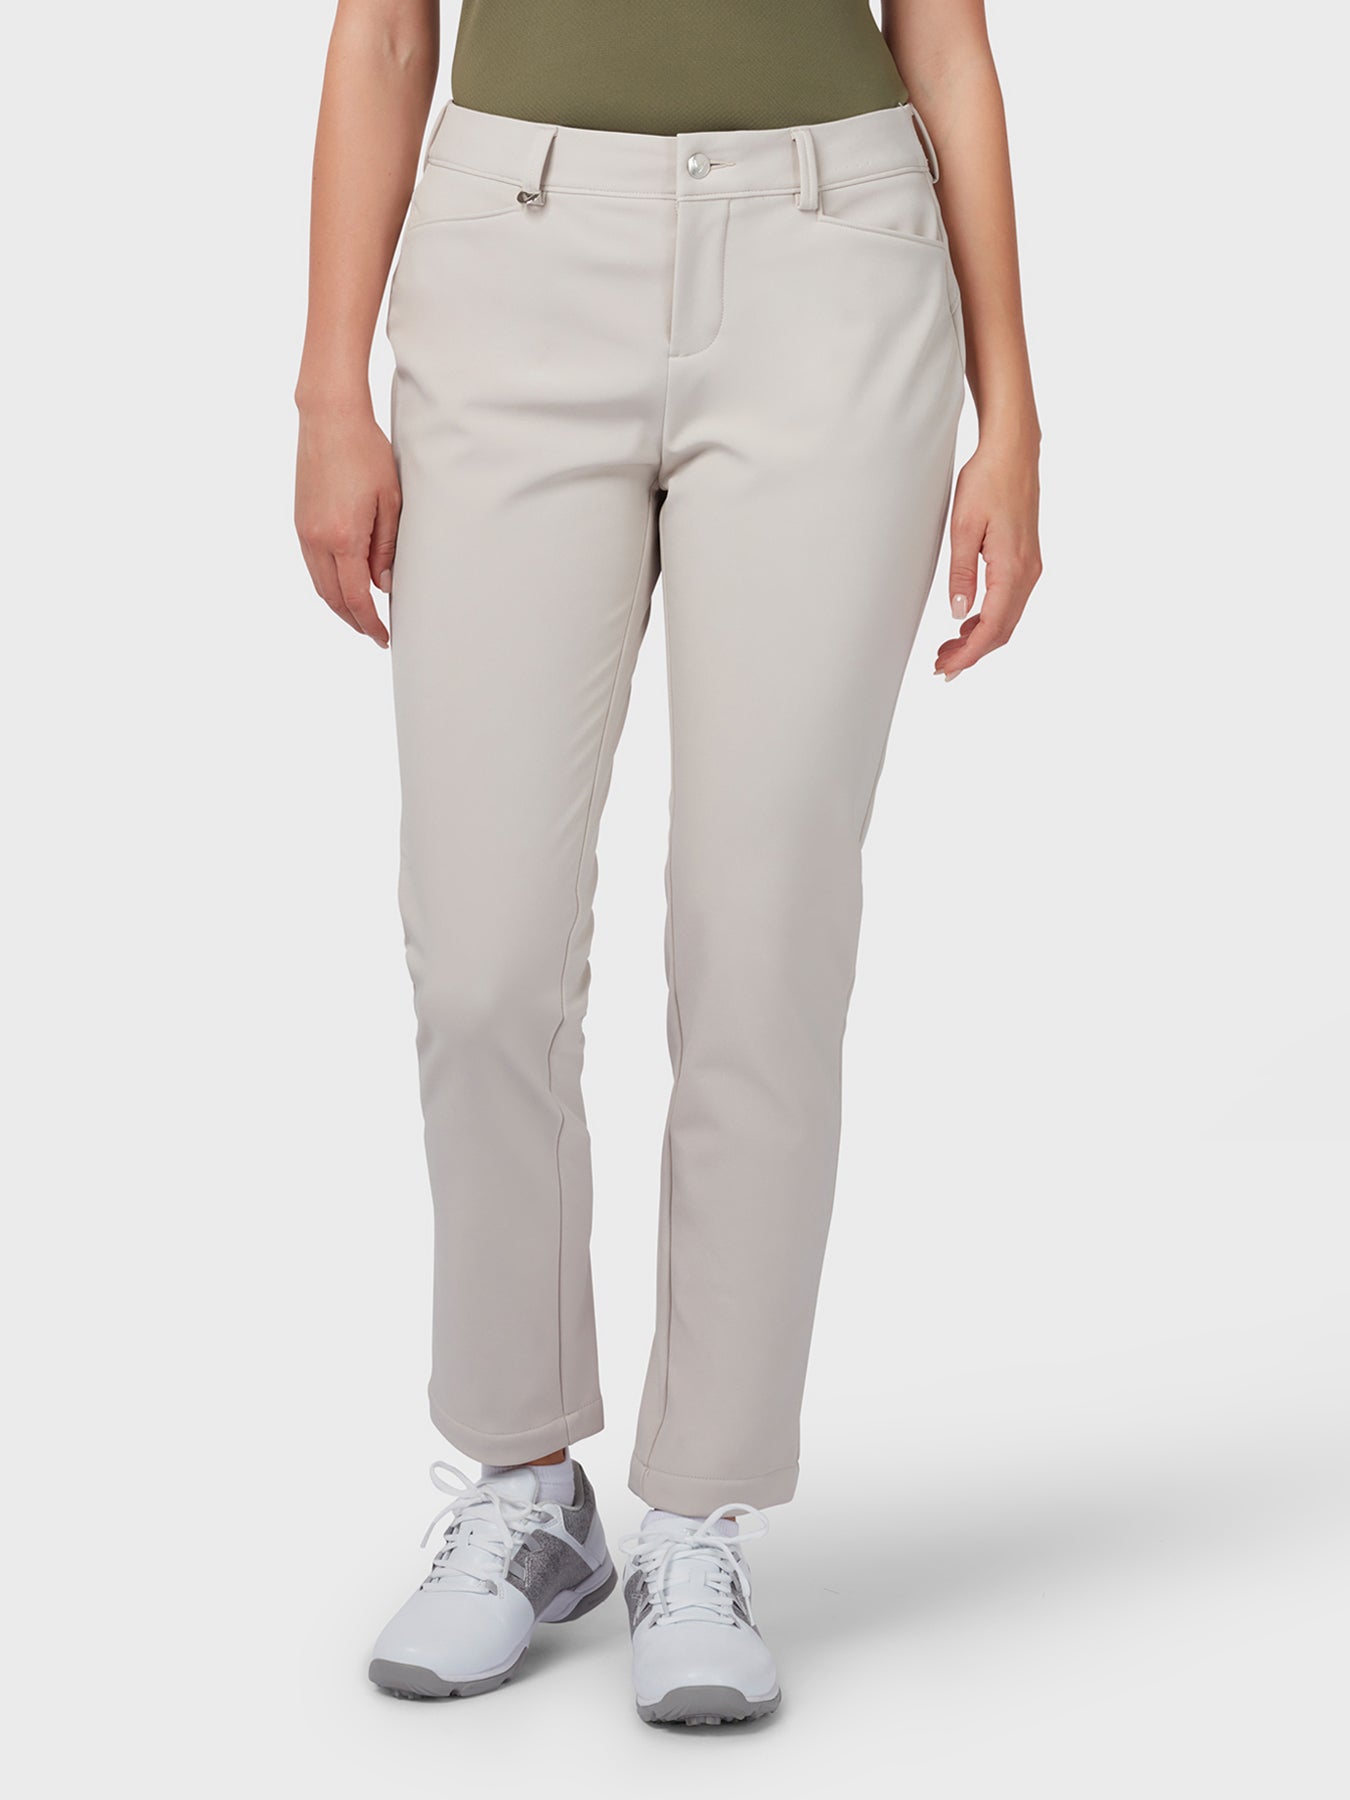 View Womens Thermal Trouser In Chateau Grey Chateau Grey L 29 information